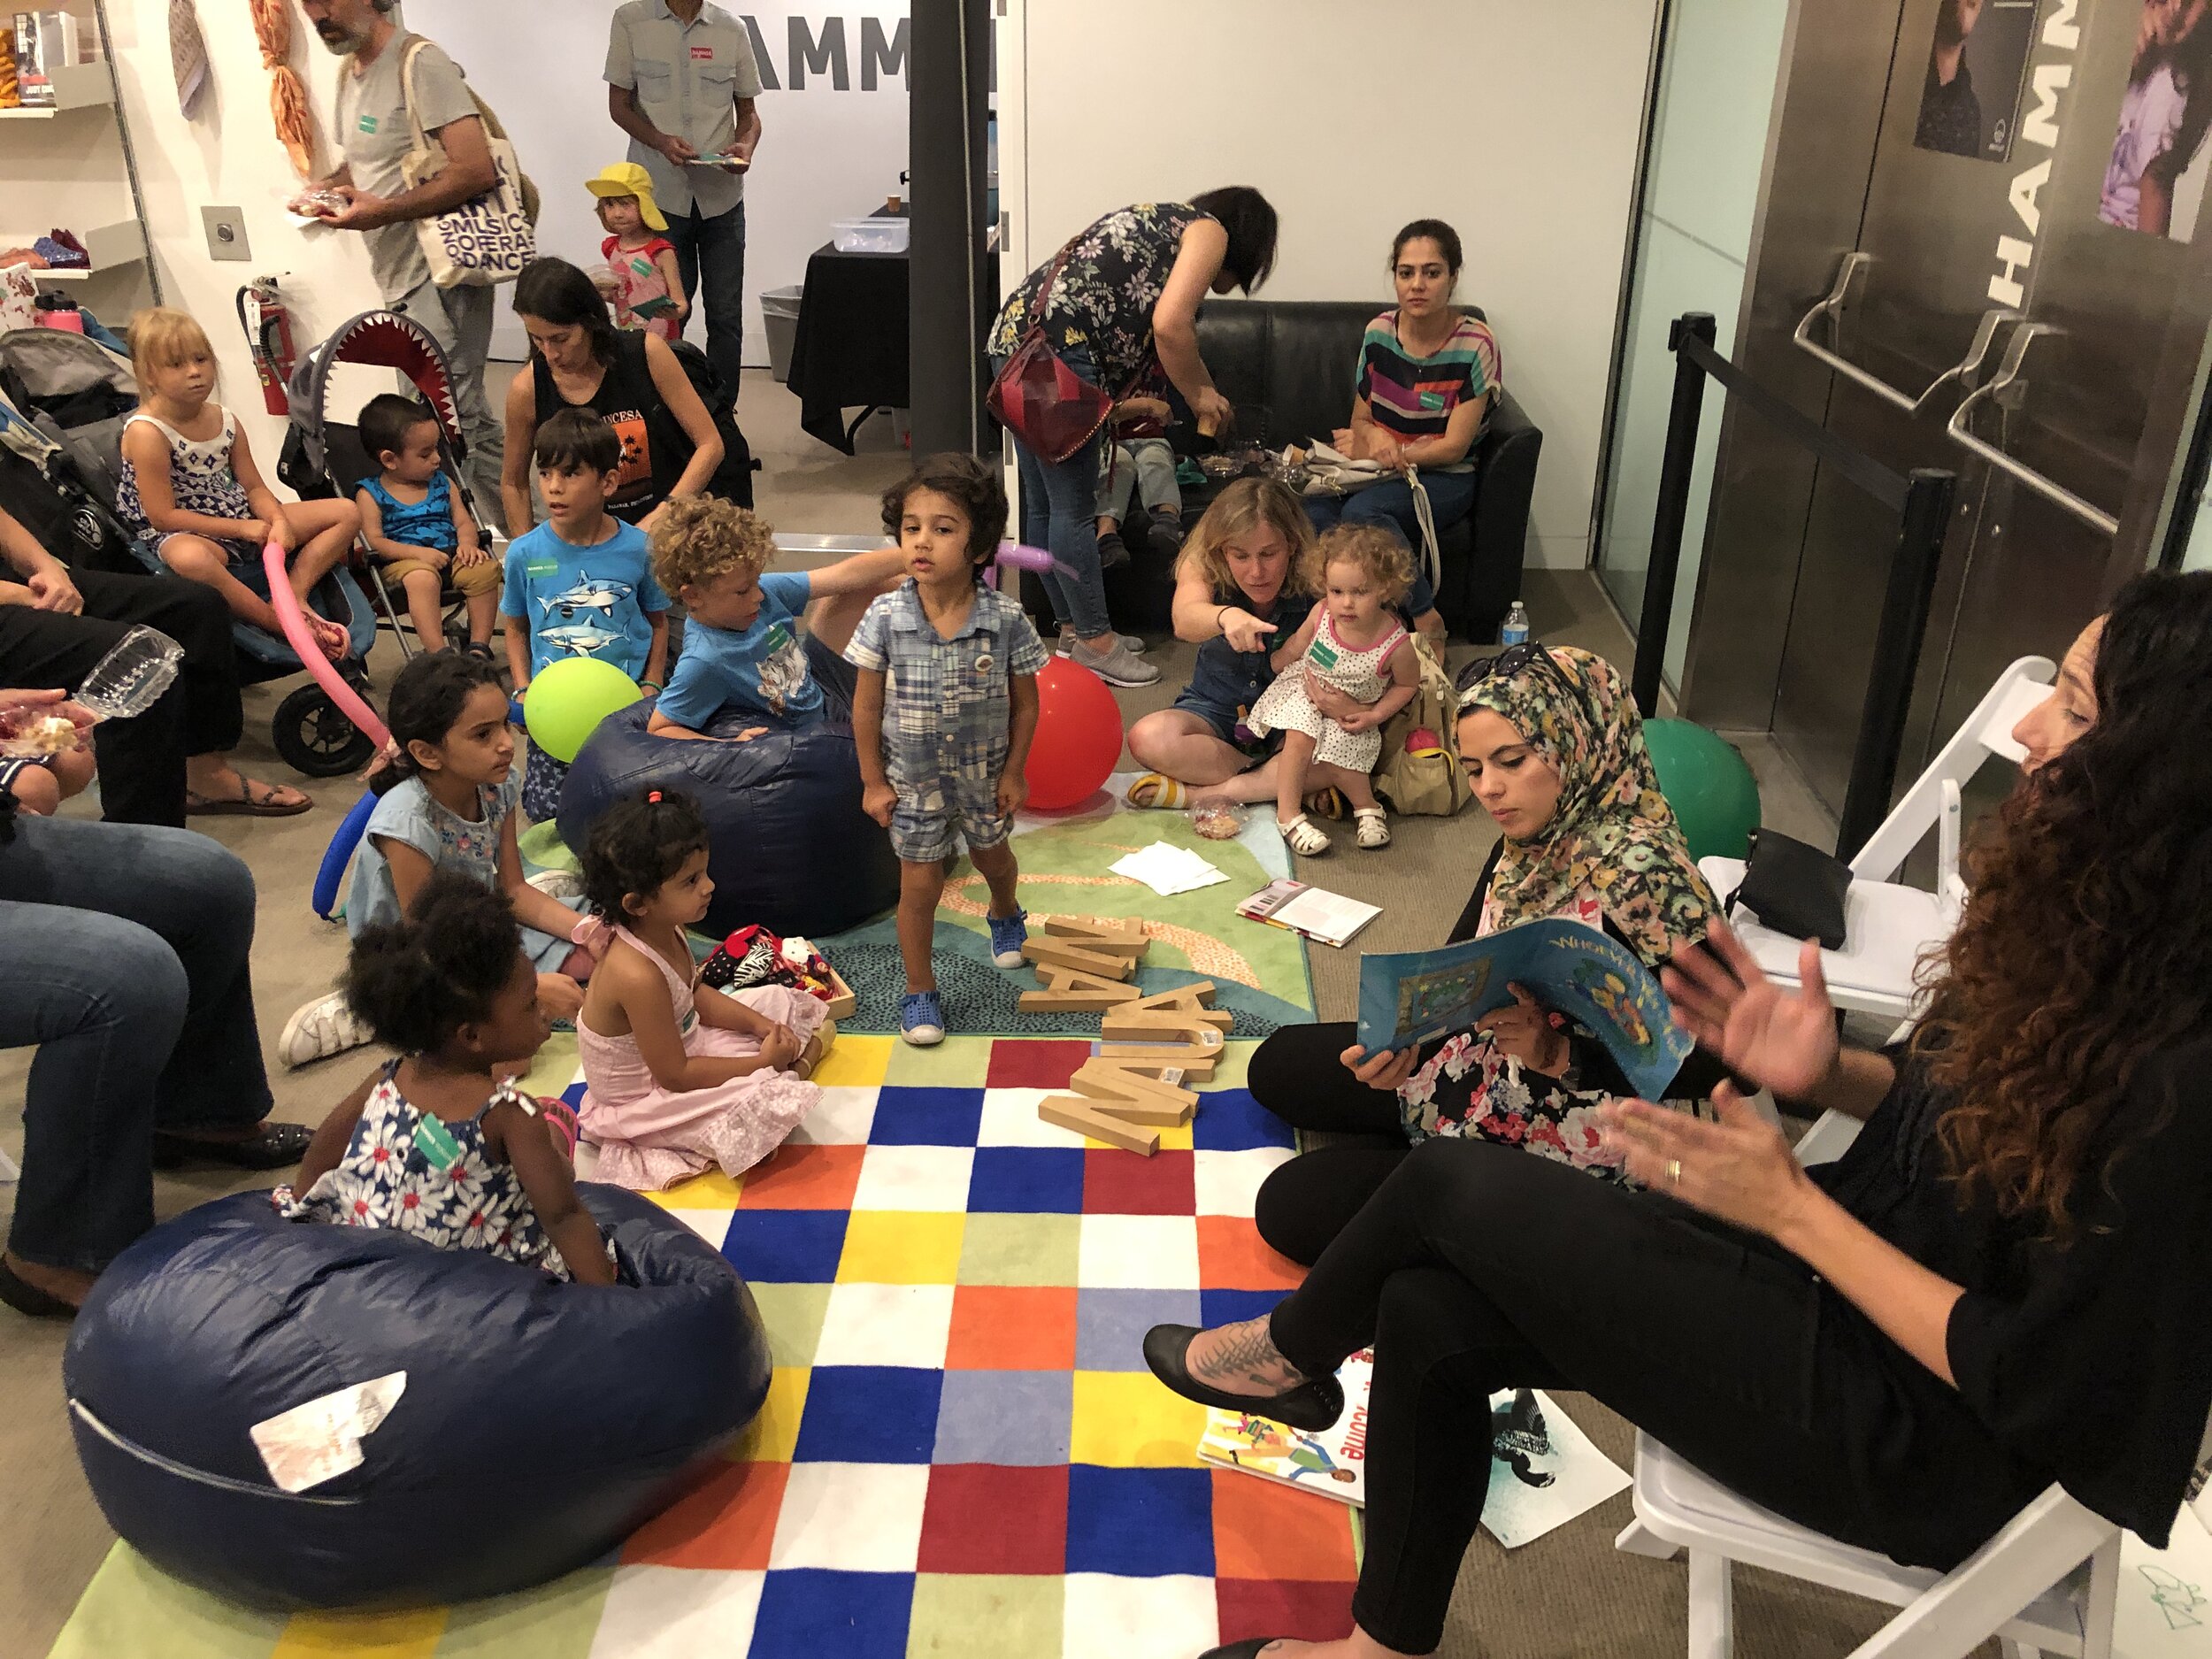  In September, 2019, we hosted 50 families at Hammer Museum Family Day for a Welcome, Neighbor themed story hour and exploration of welcoming kids who are new in our school or playground. 